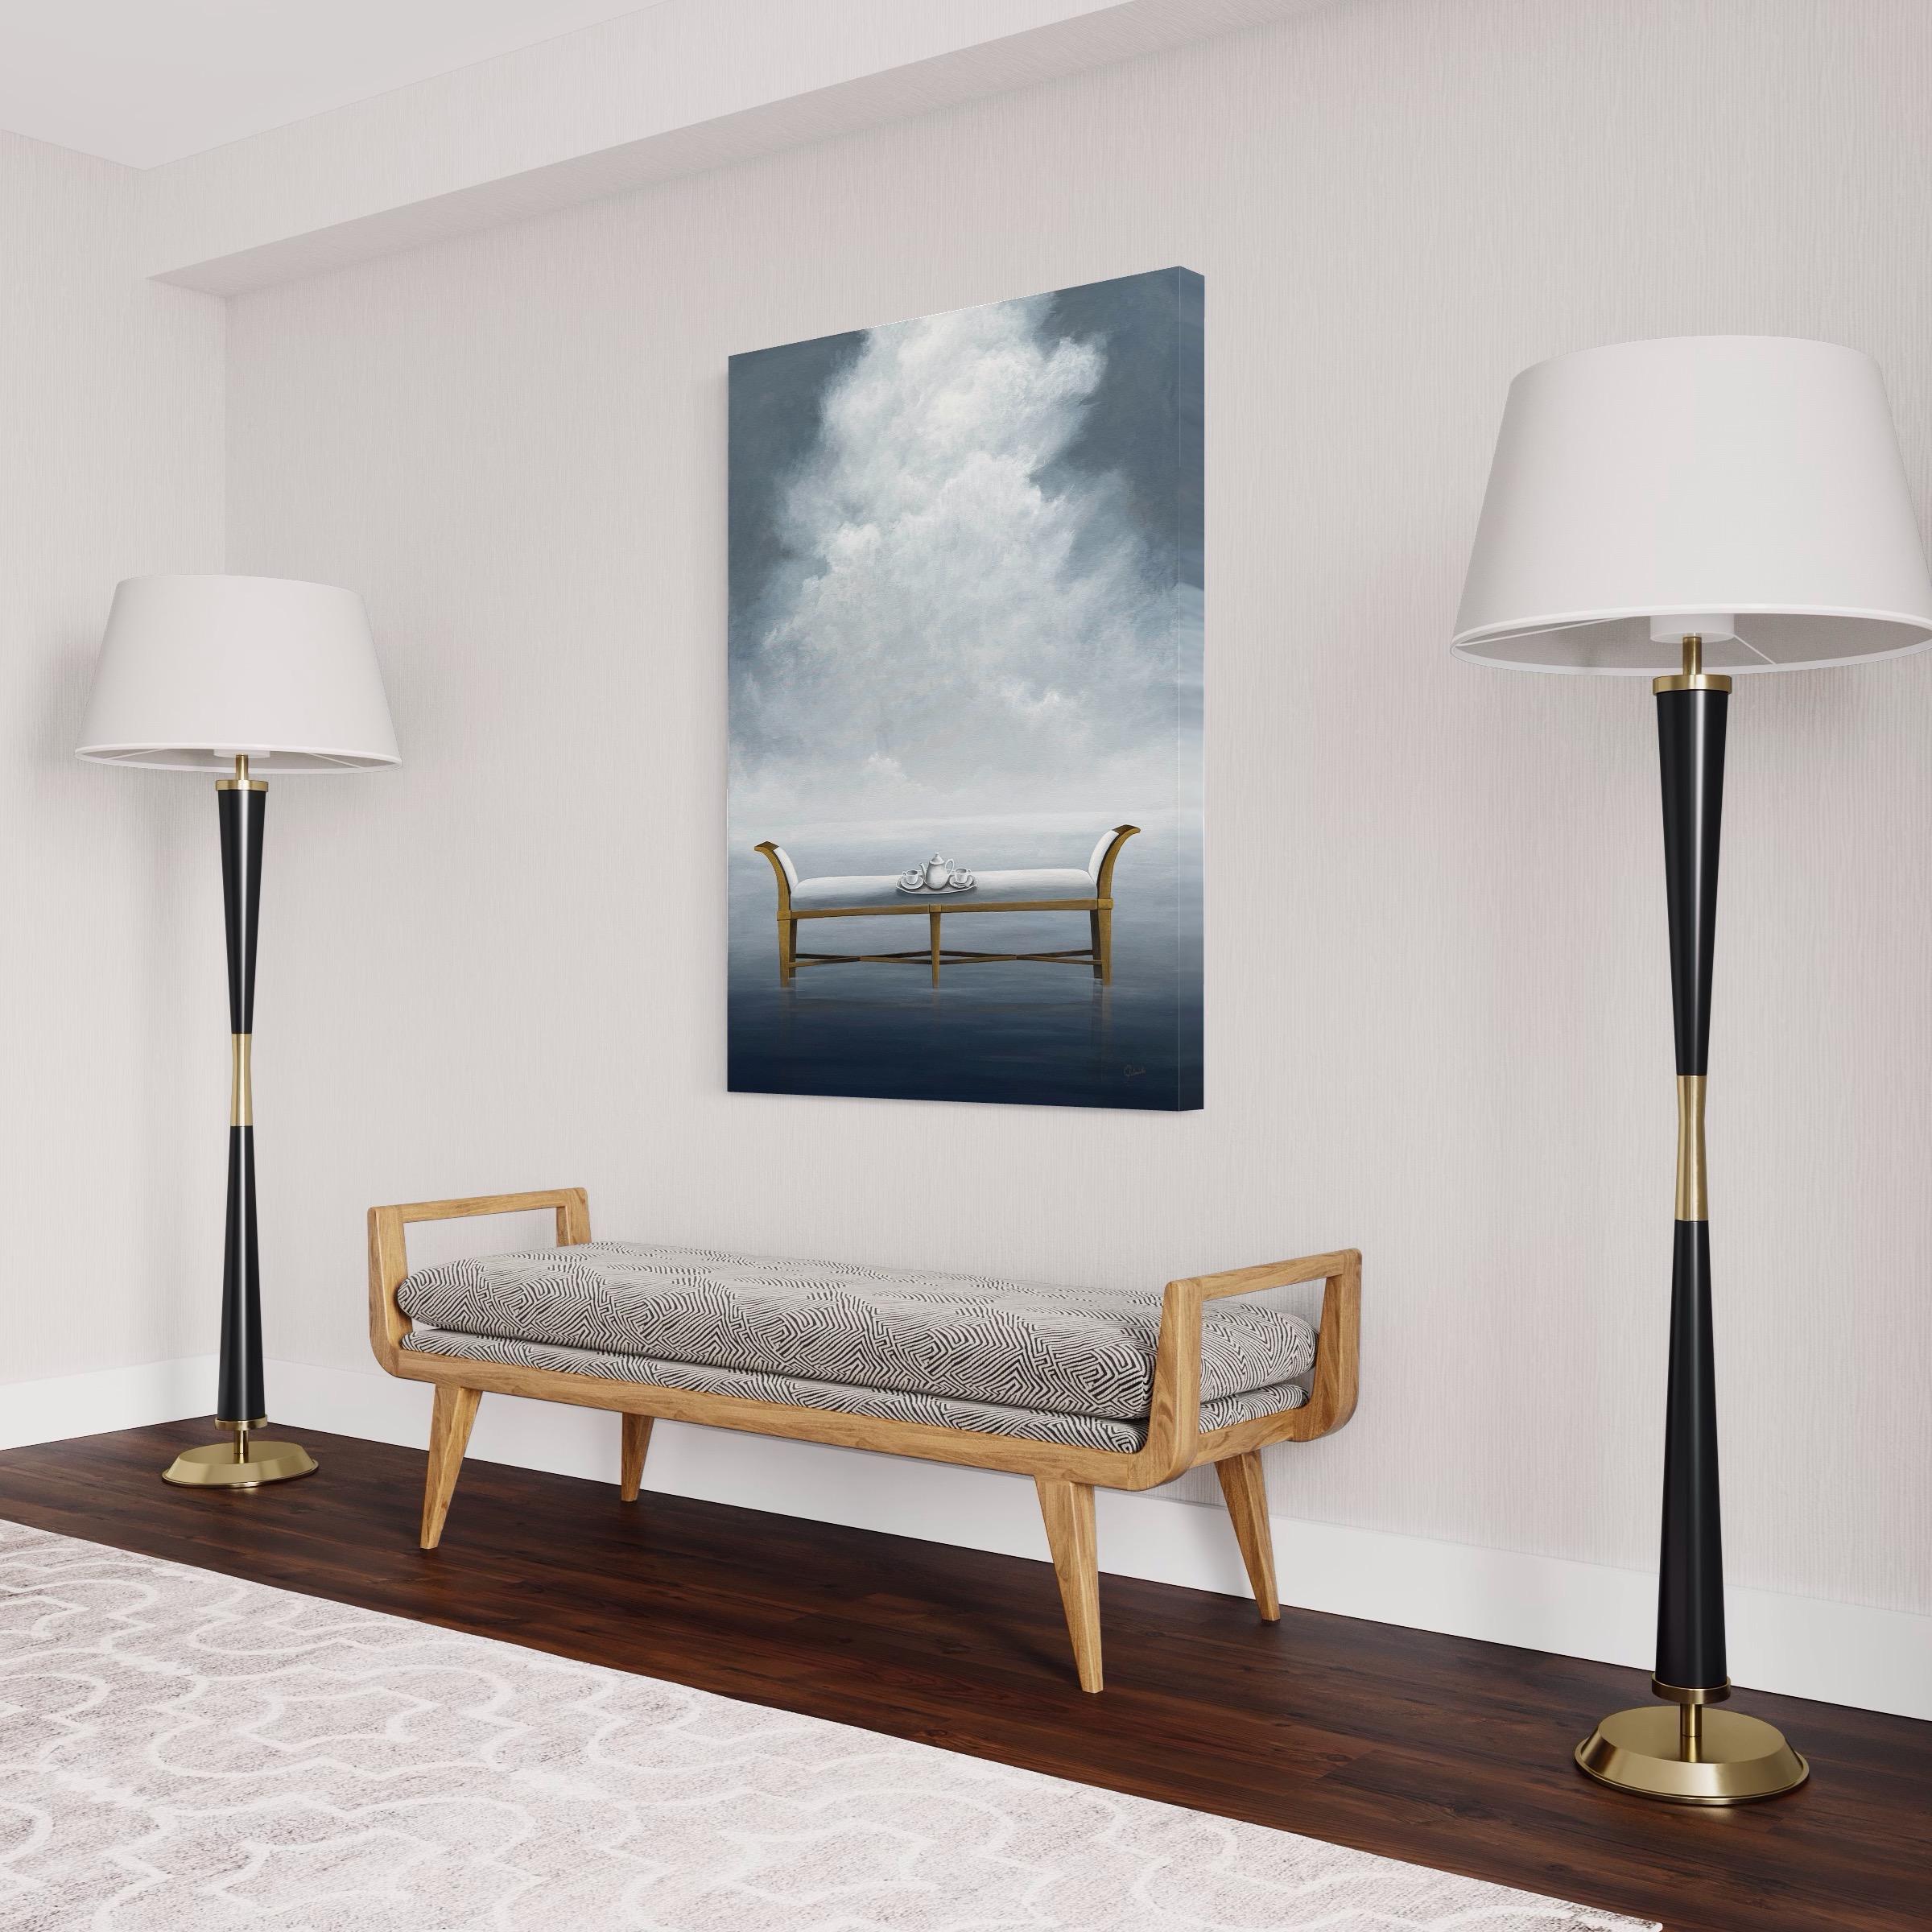 This ethereal artwork measures 40 inches high and 30 inches wide, with a vertical orientation that demands attention. Designed for your convenience, it comes stretched and ready to hang, and painted on the sides to provide a seamless continuation of